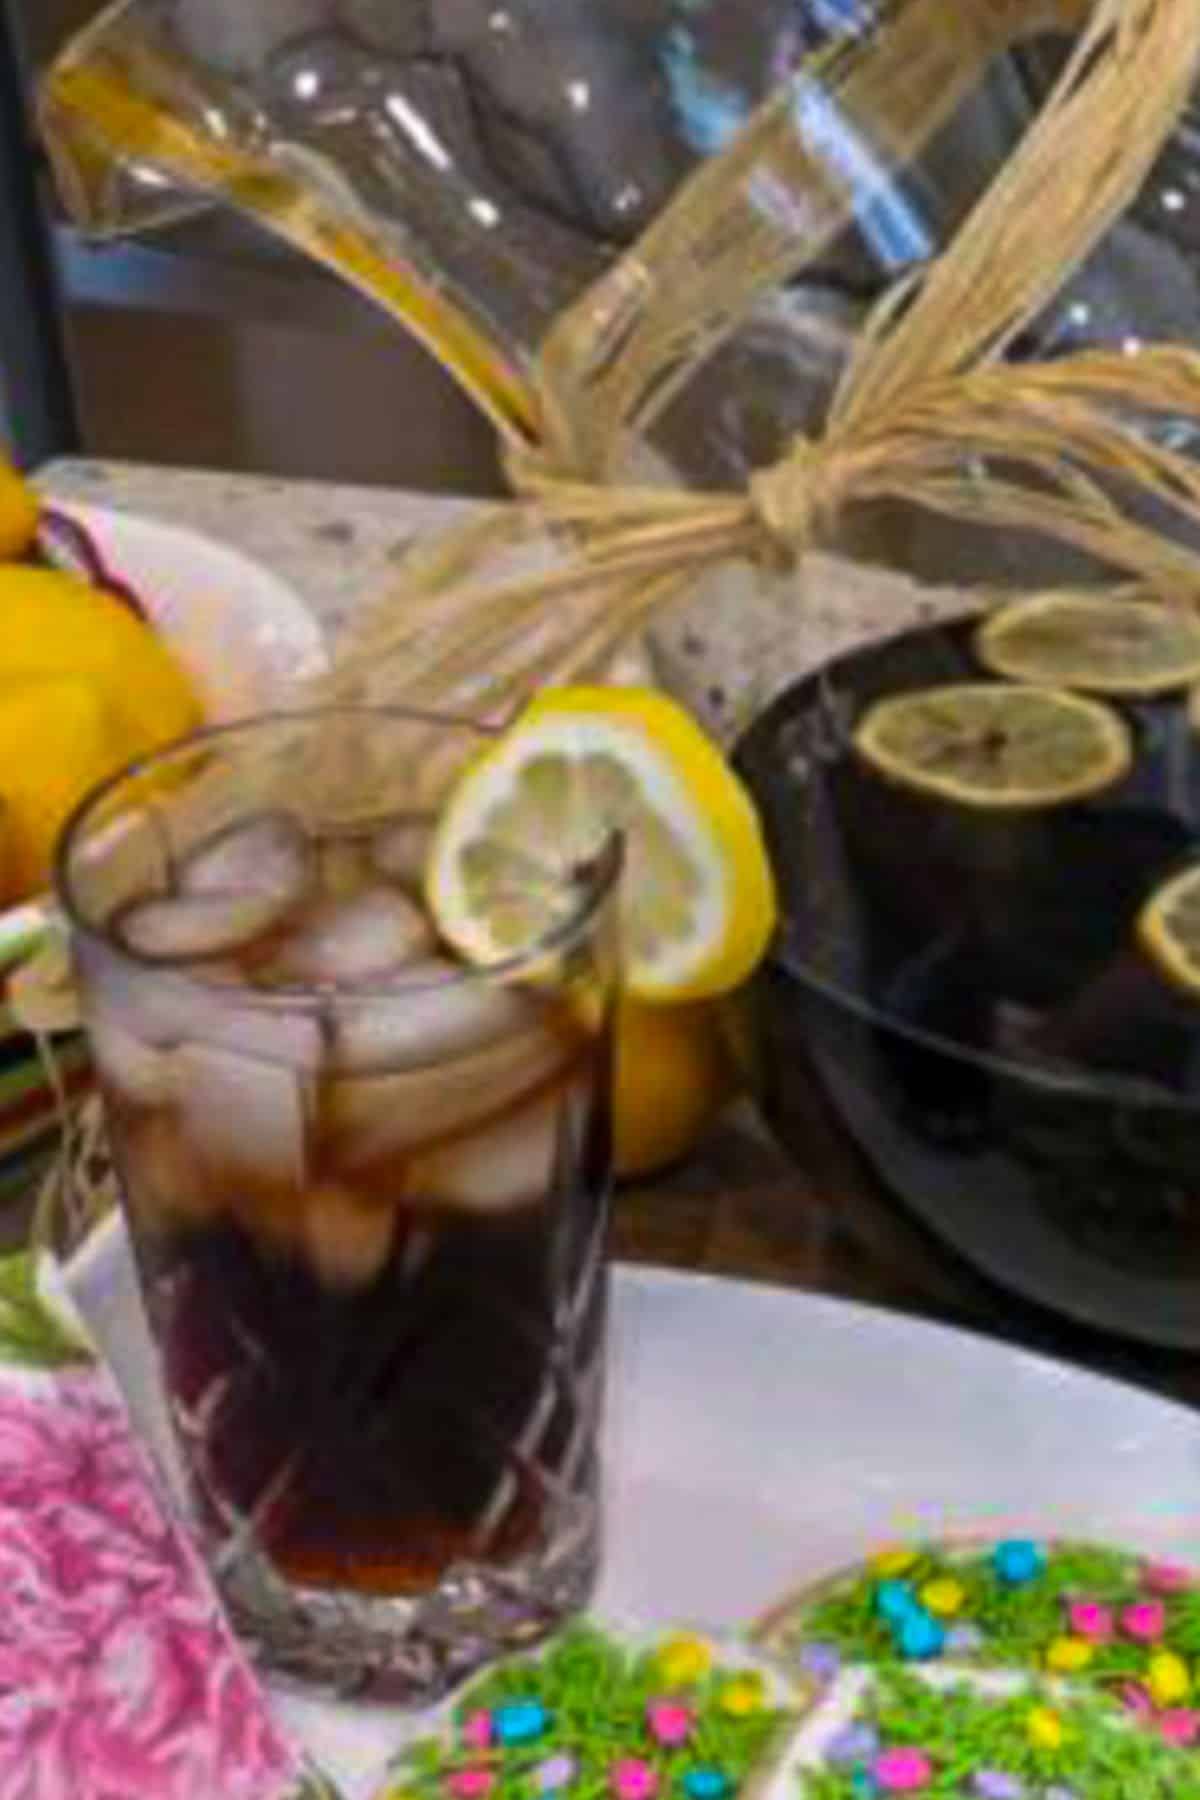 A clear glass of a dark liquid an ice with a lemon slice on the rim next to. a pitcher of root beer.